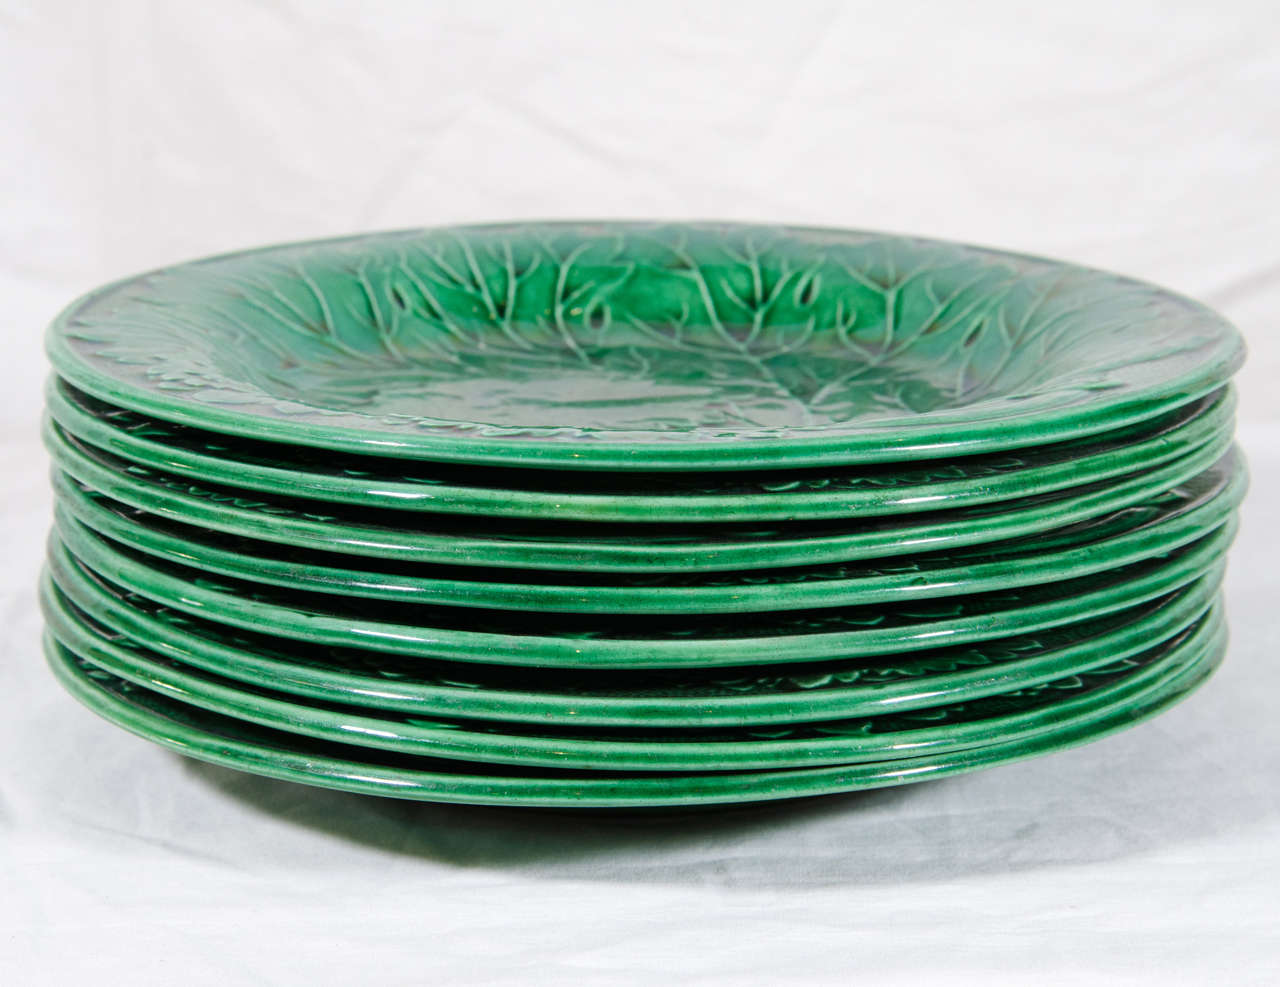 English Set of Eight Antique Green Majolica Dishes